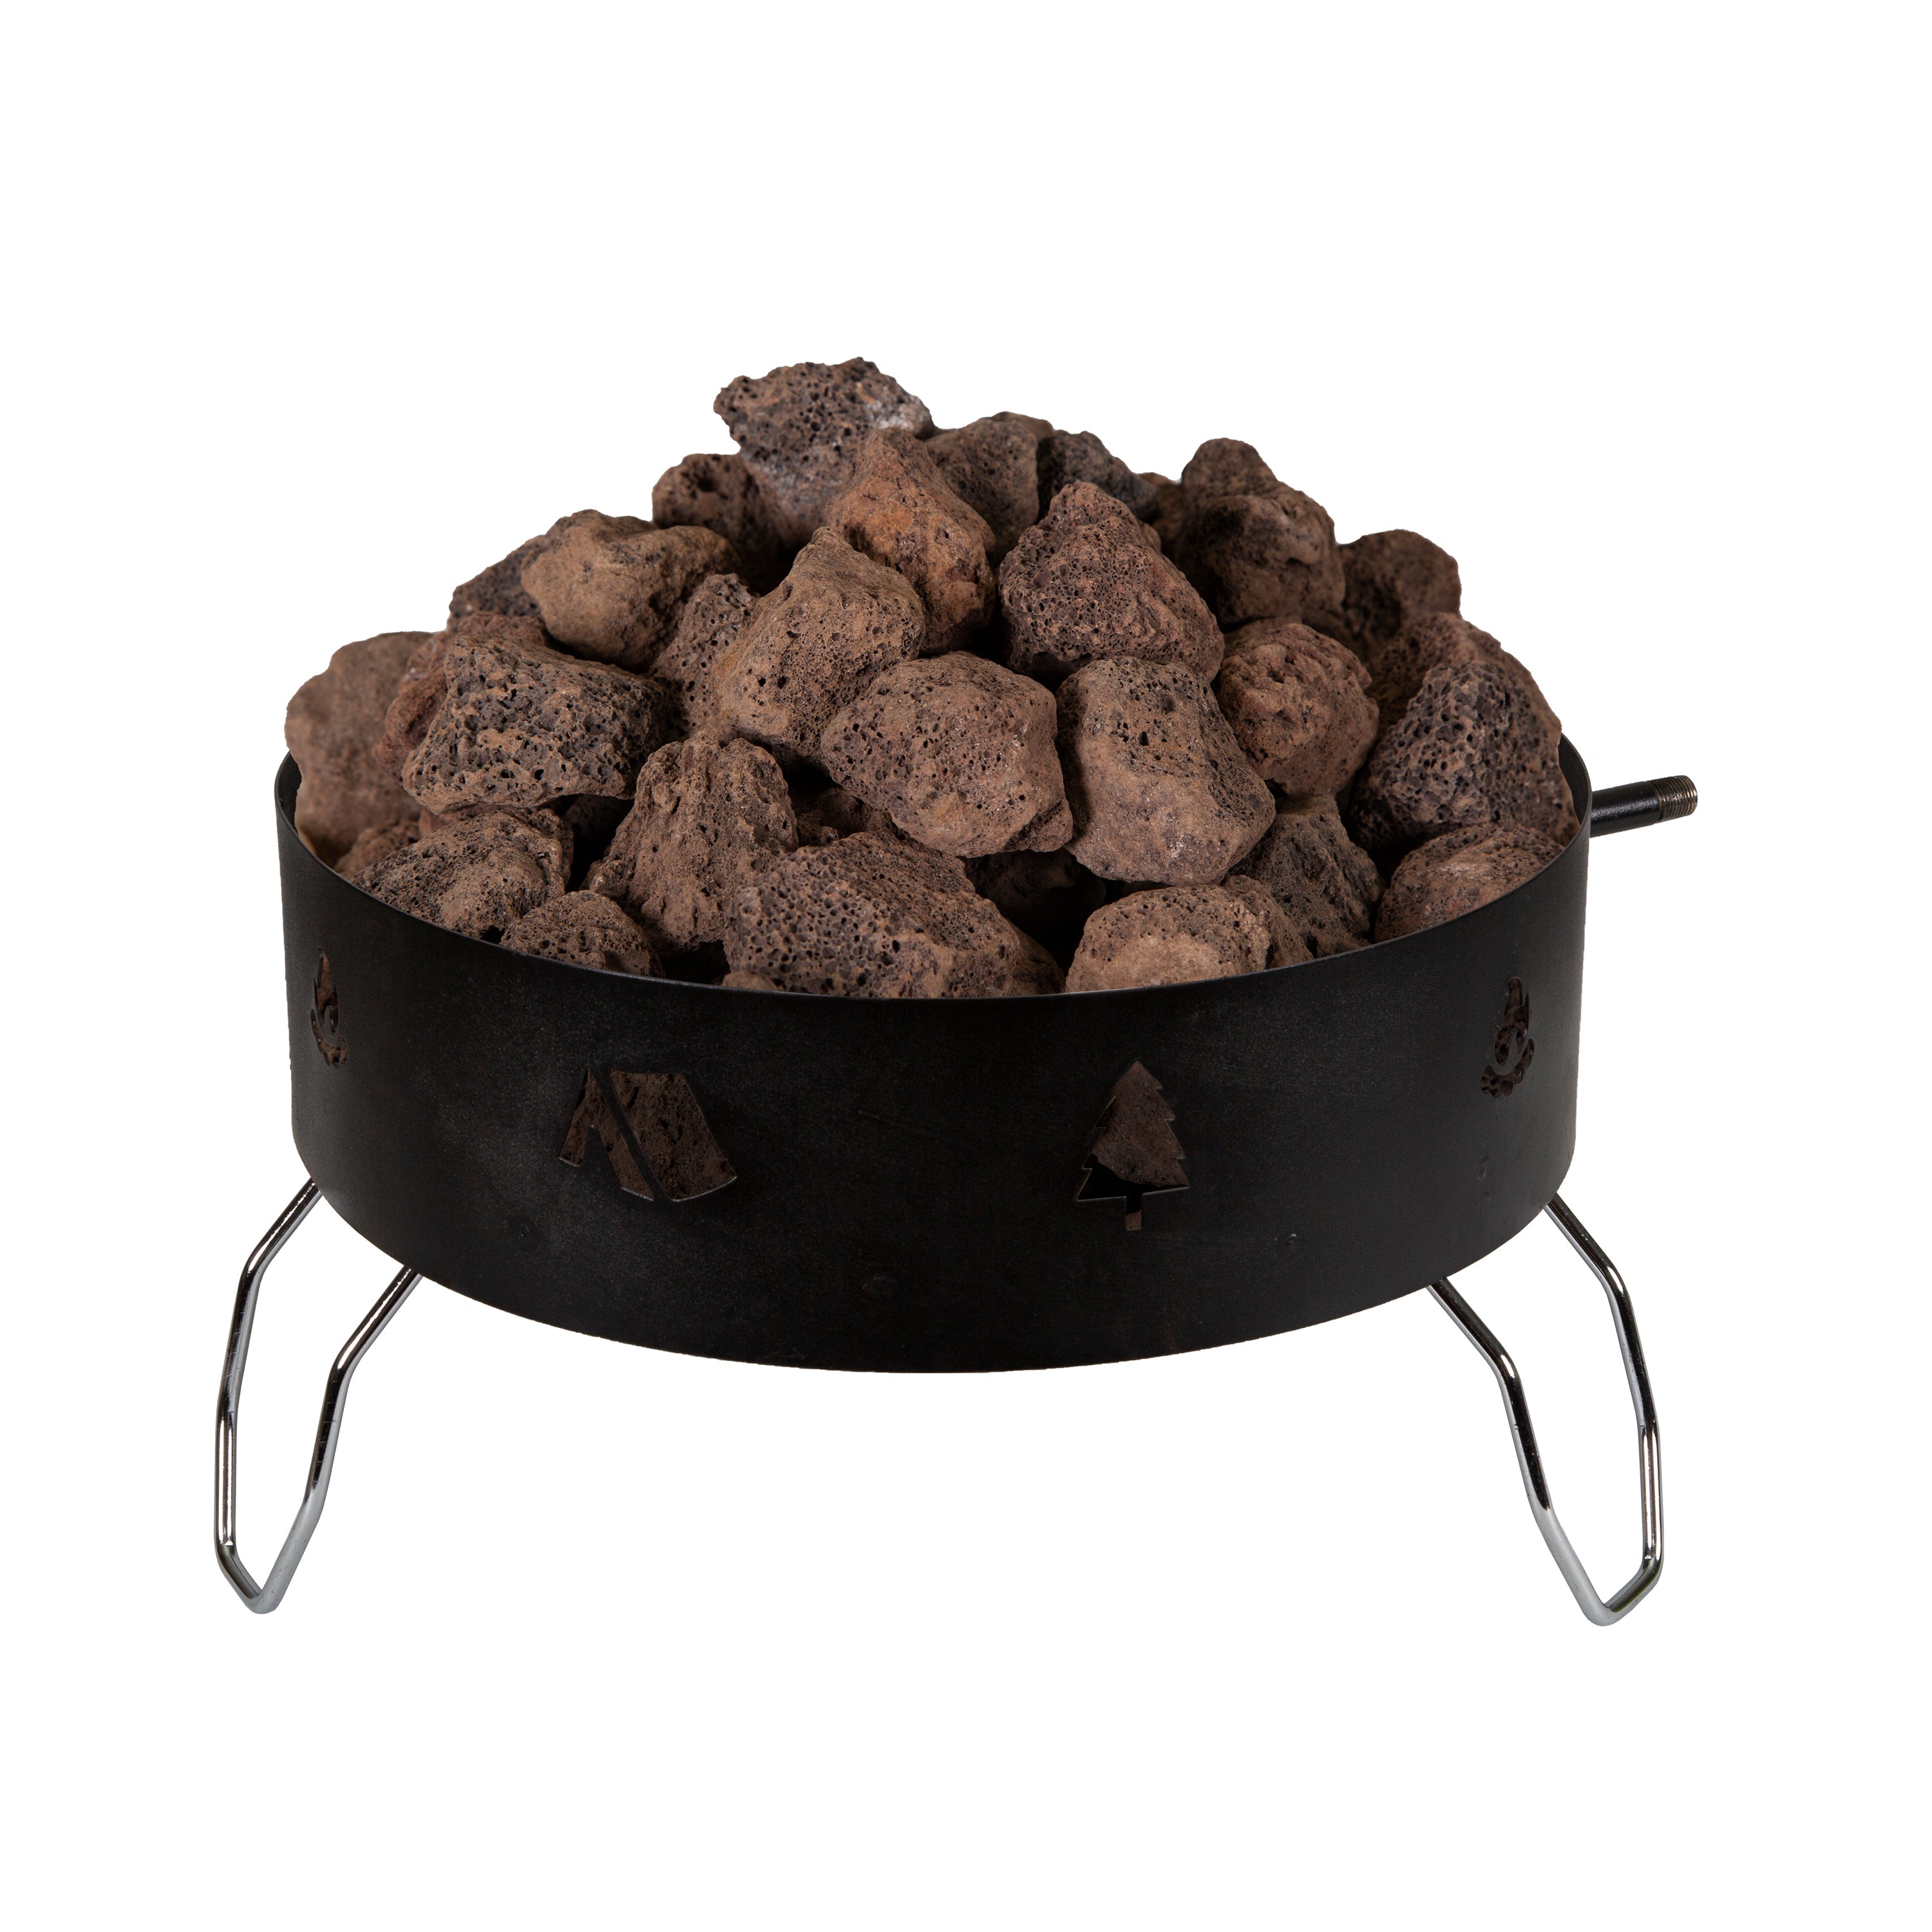 Propane Fire Pit- With Lava Rocks